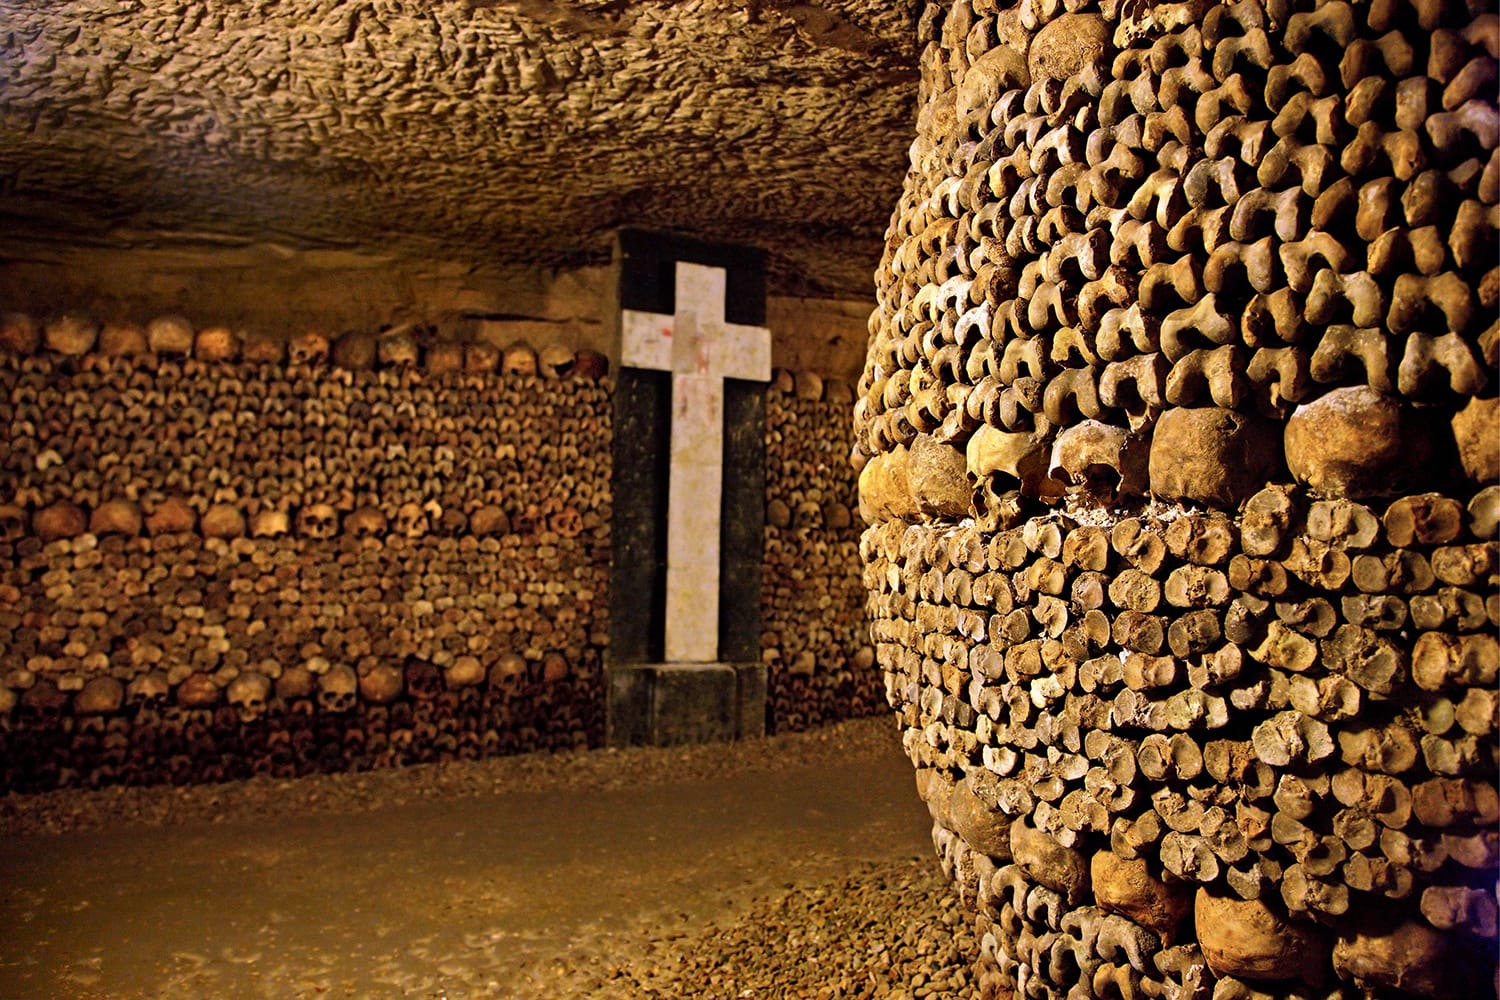 Catacombs in Paris, France